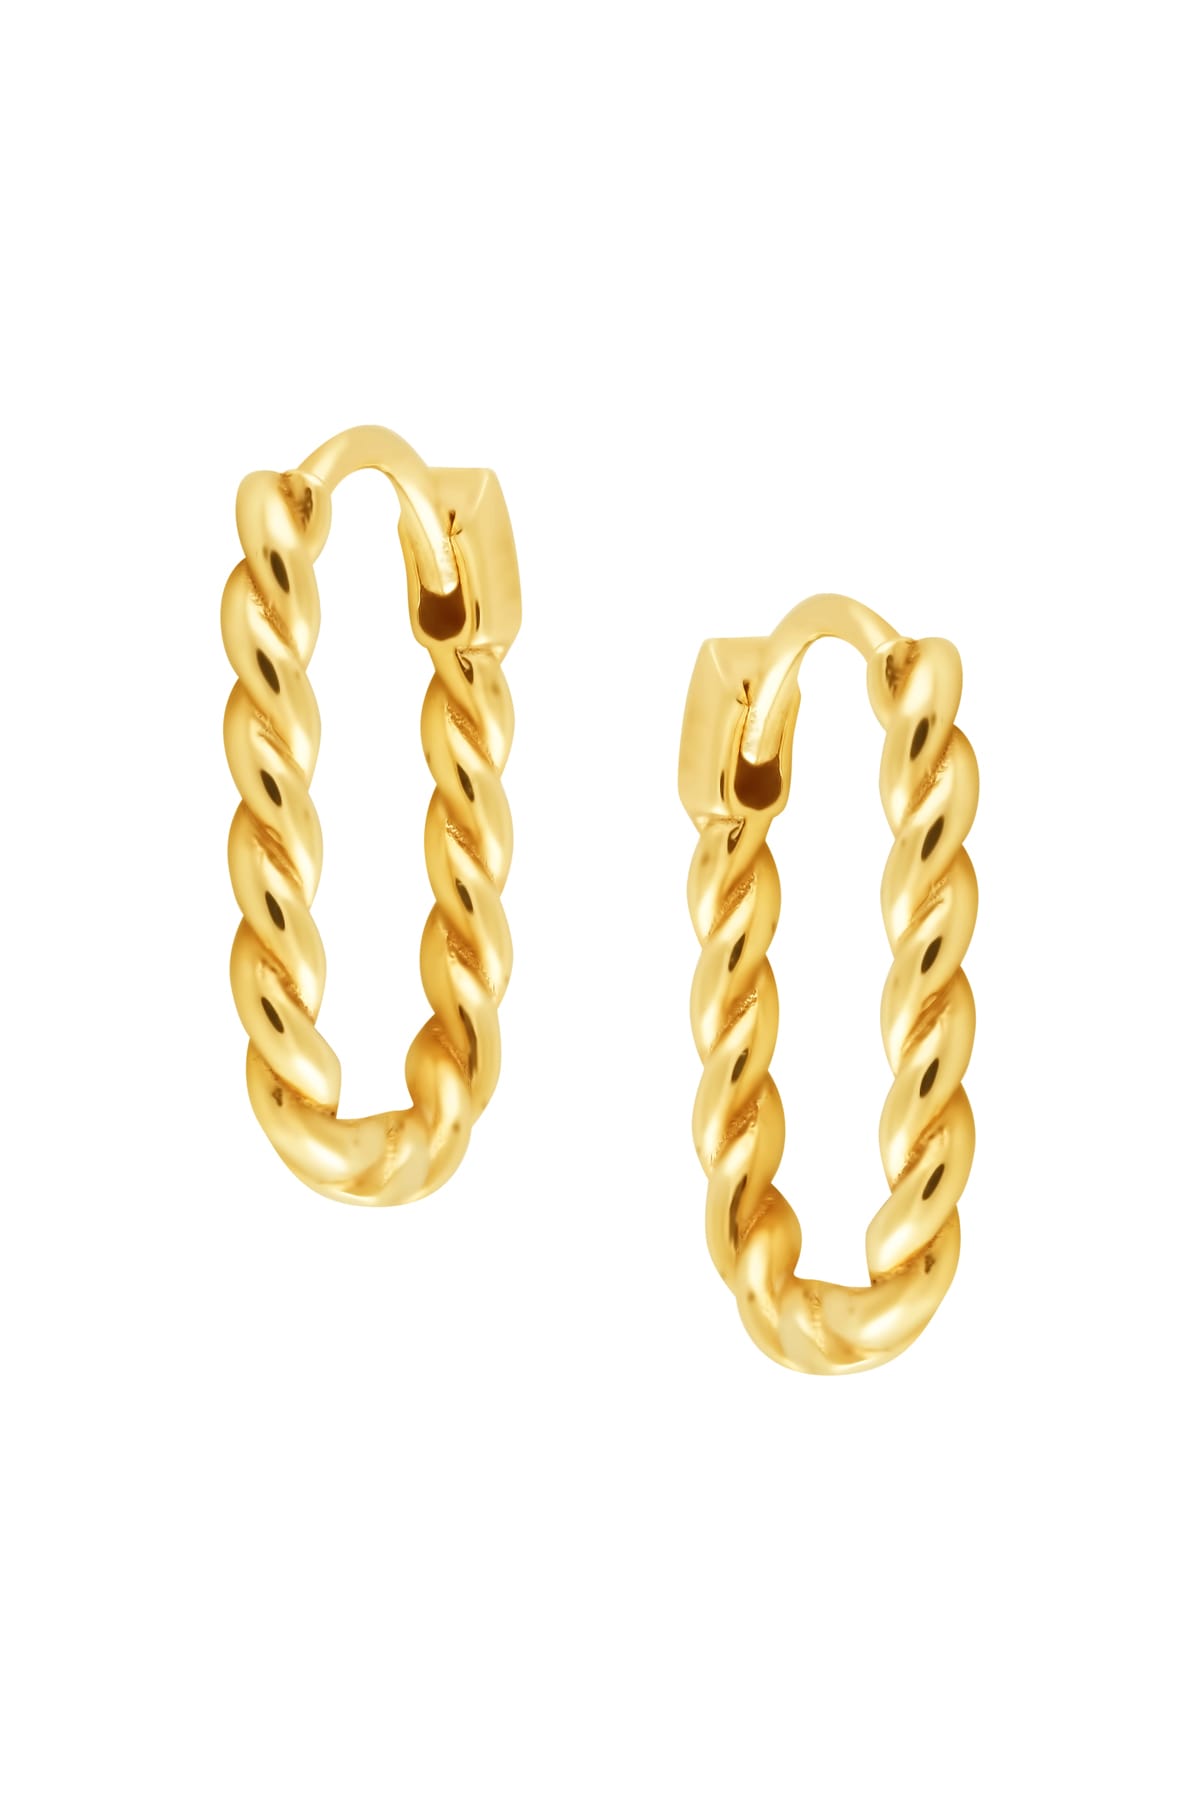 Rectangle Shaped Twisted Gold Huggie Earrings from LeGassick.